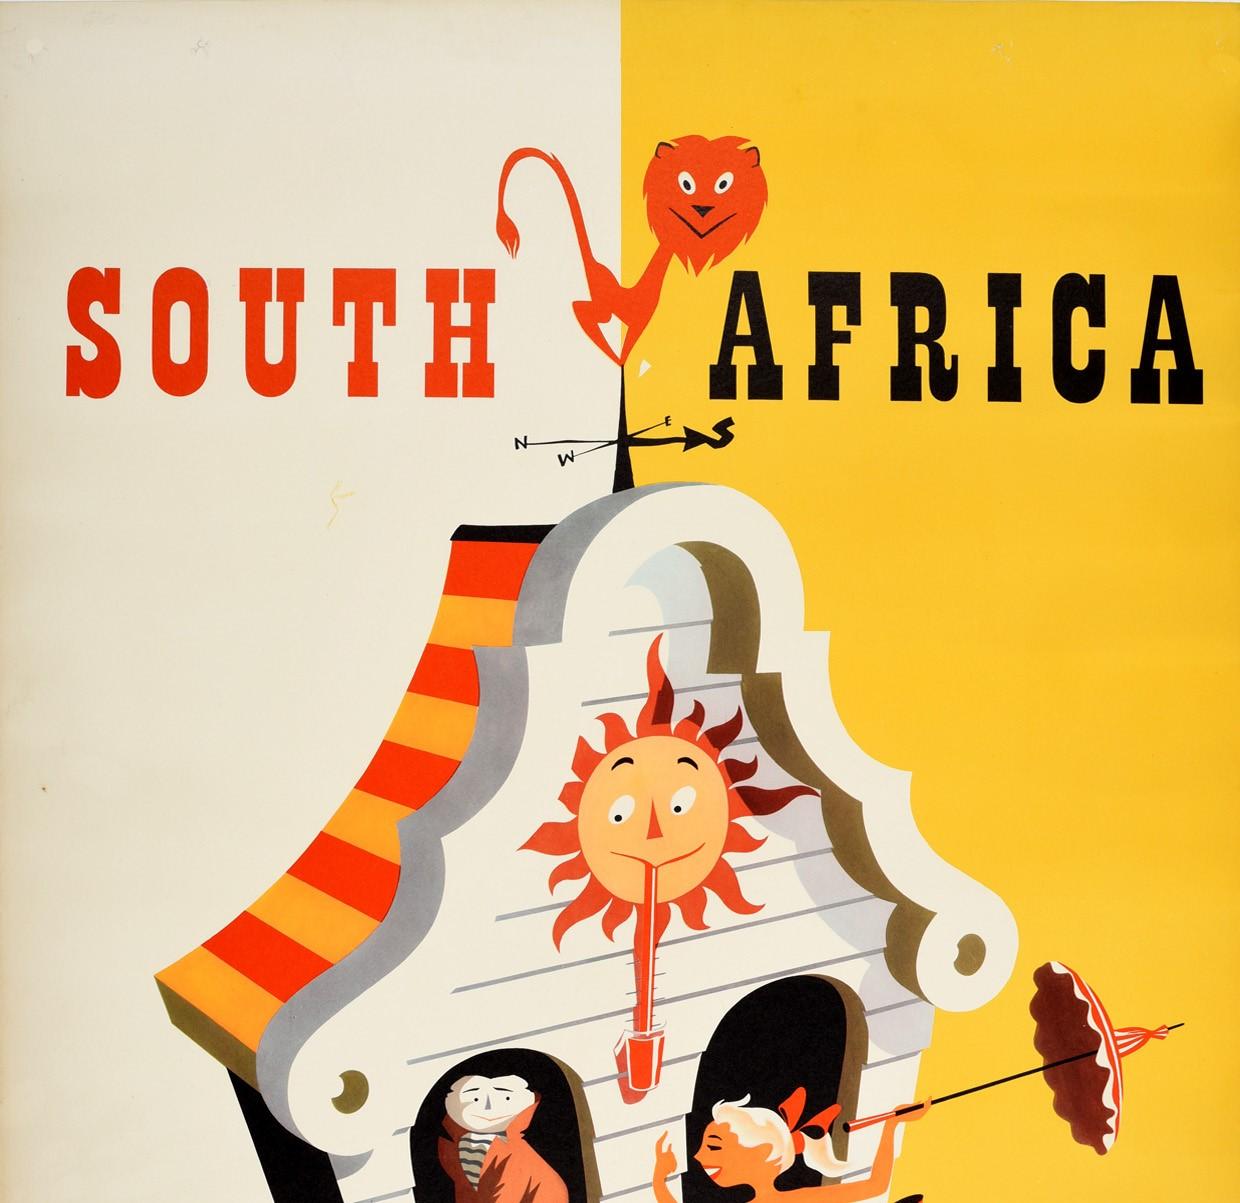 Original vintage cruise travel poster - South Africa come on out by Union-Castle the weather's wonderful - featuring a fun and colourful design depicting a smiling young lady in a red bikini and red bow holding a red and white parasol umbrella in